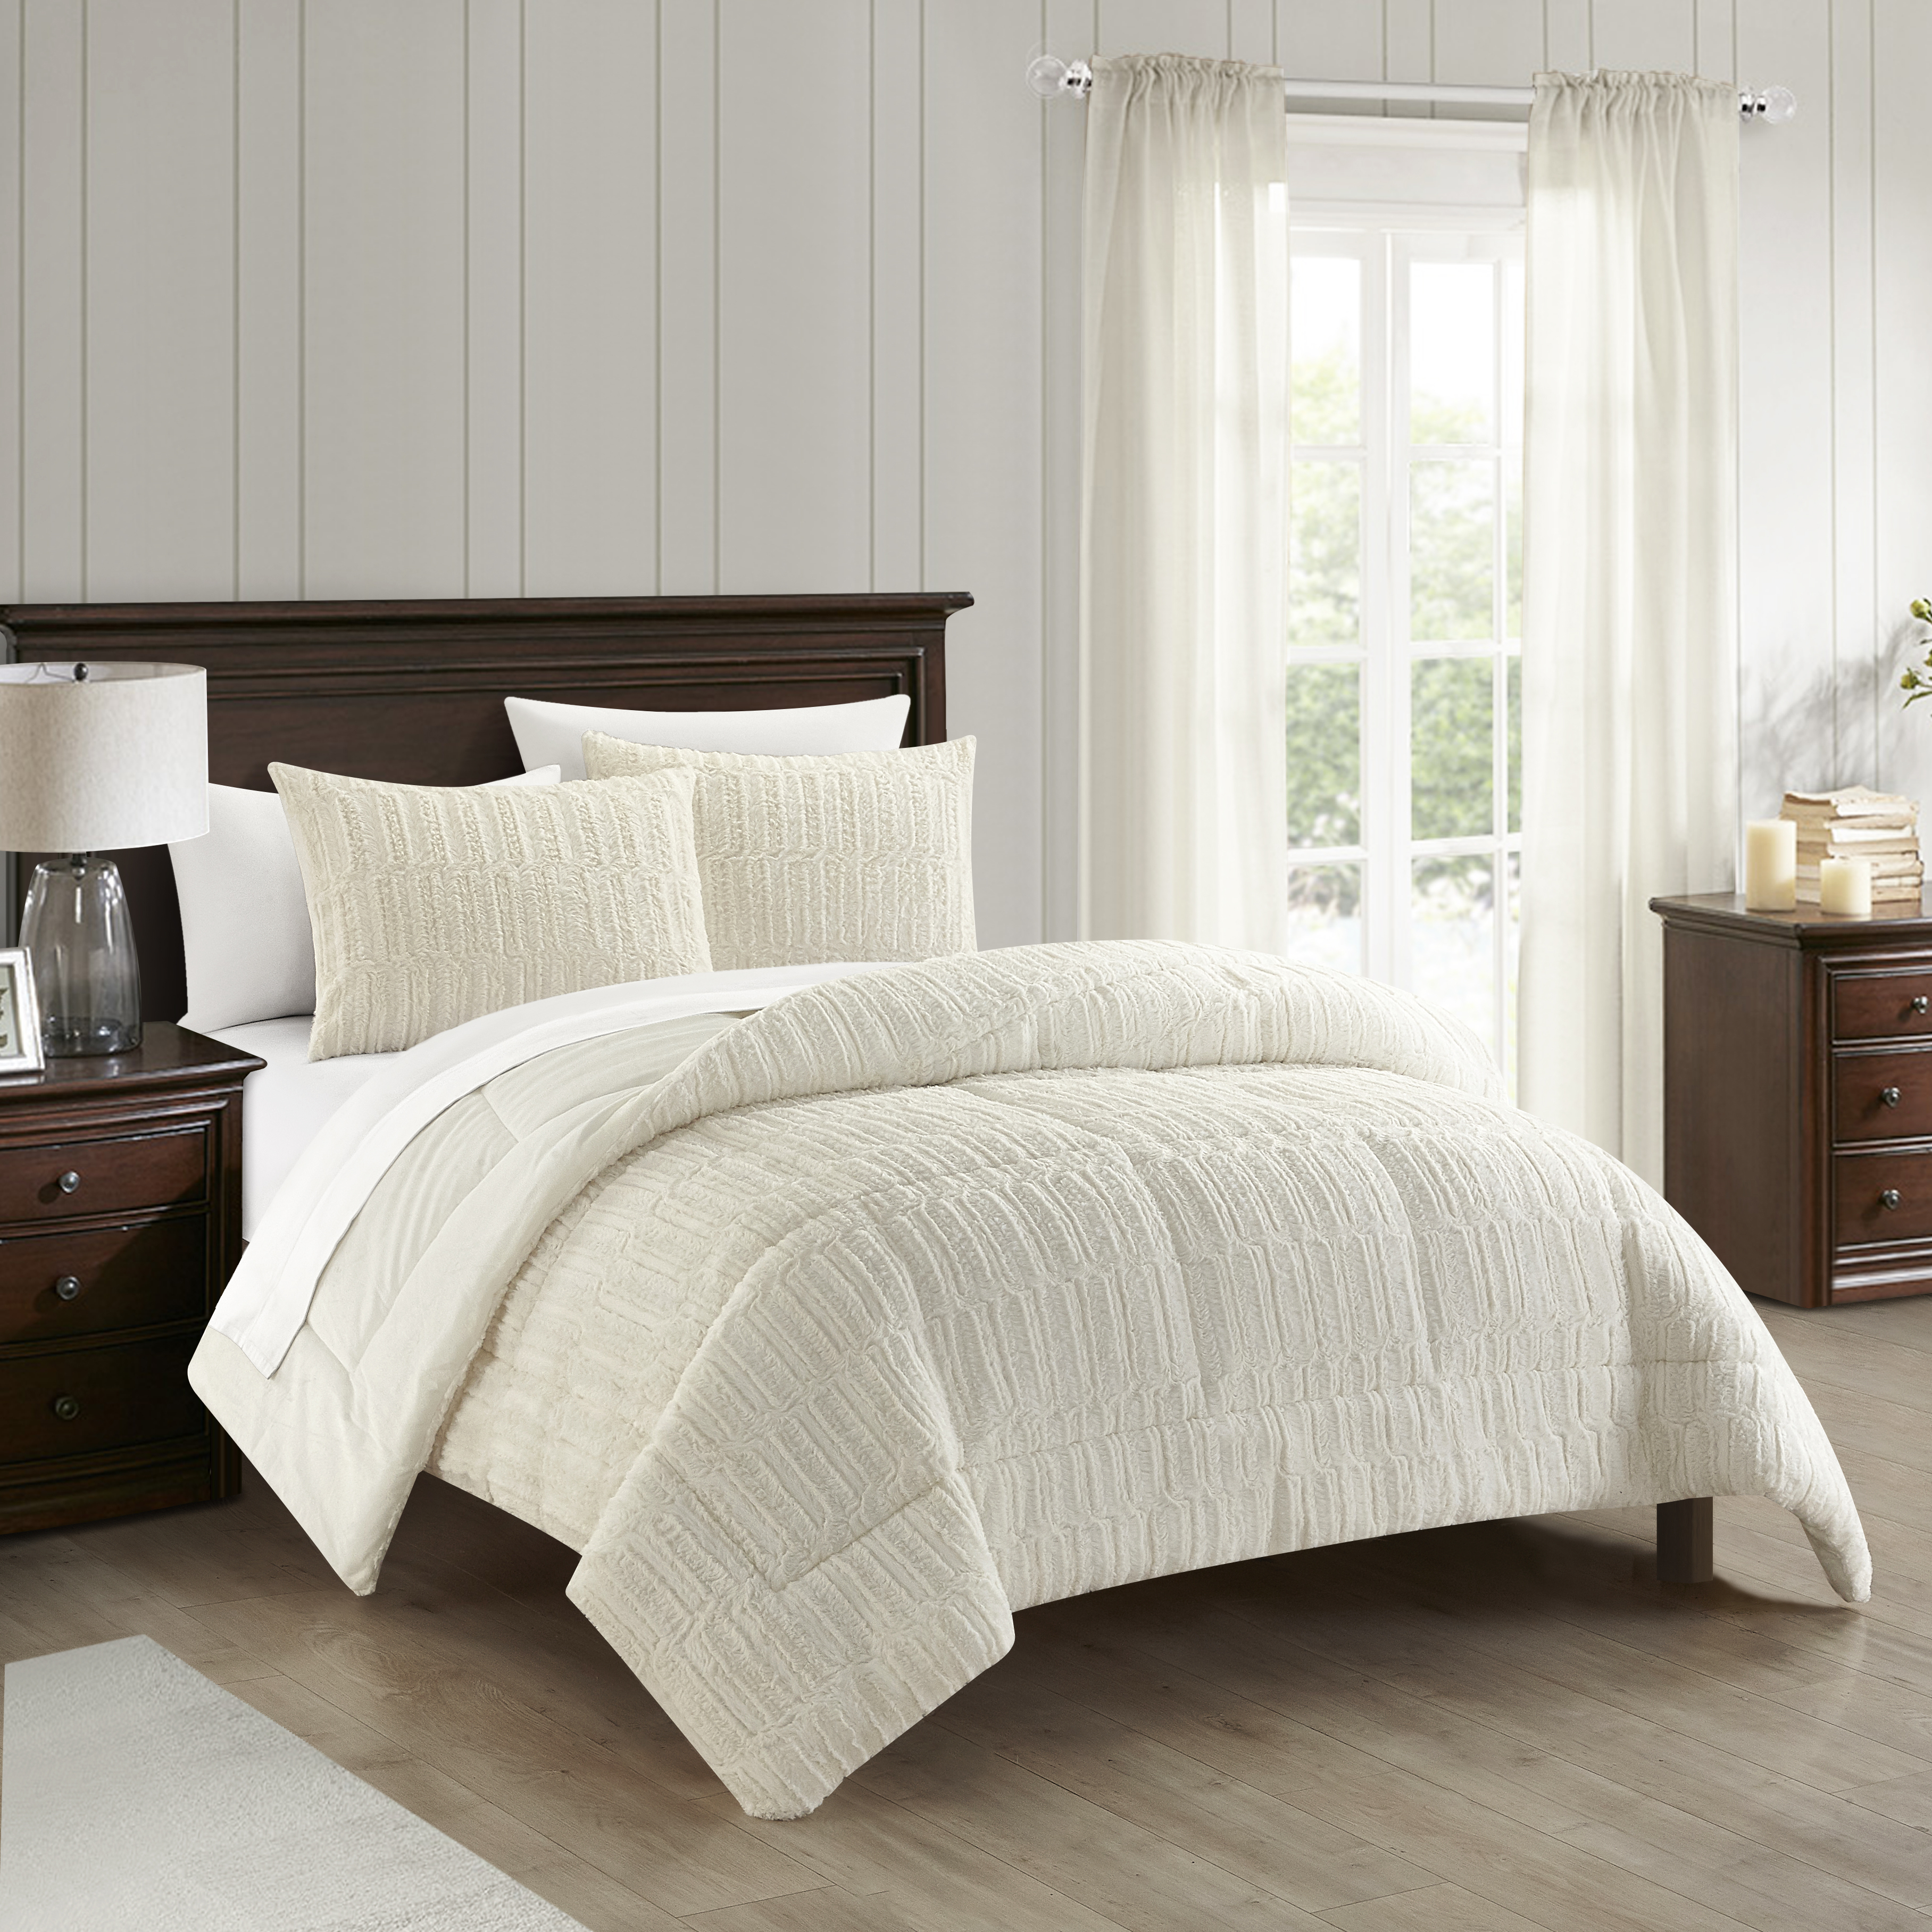 Farca 3 Or 2 Piece Comforter Textured Geometric Pattern Faux Micro-Mink Backing - Beige, King - 3 Piece